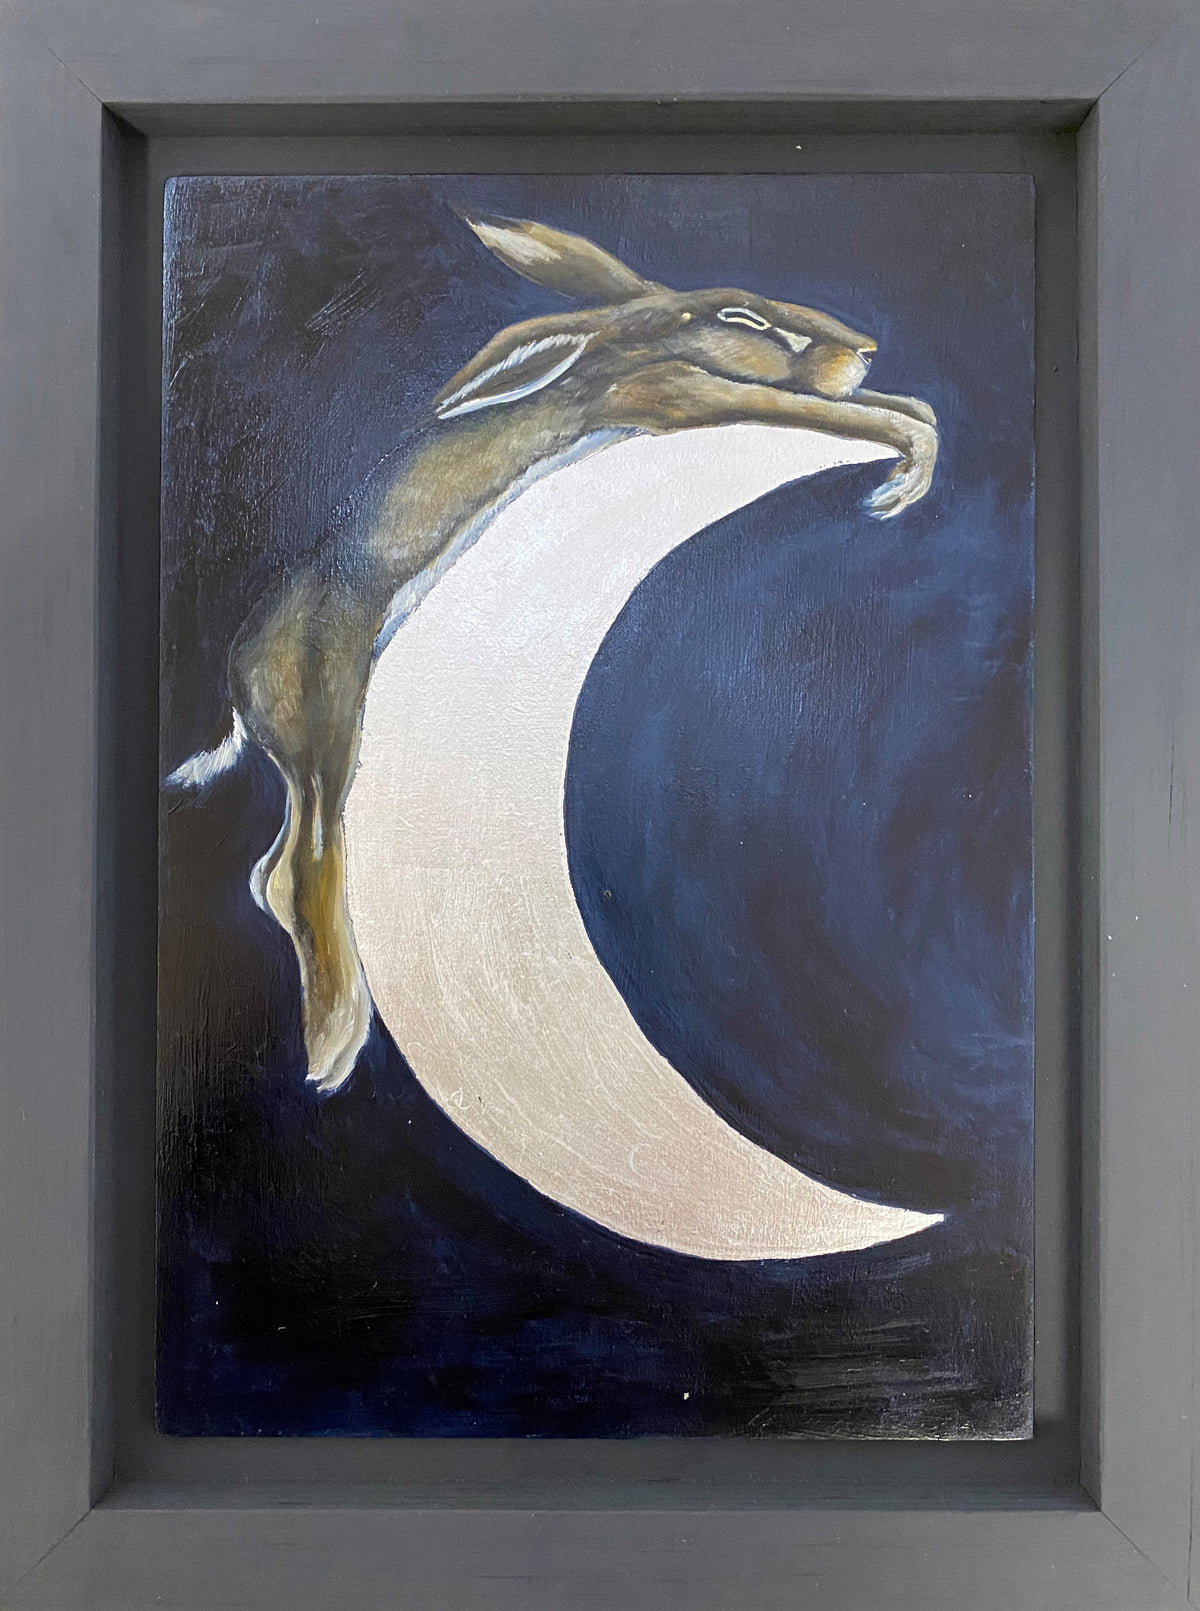 Hare on Silver Moon by Becky Munting